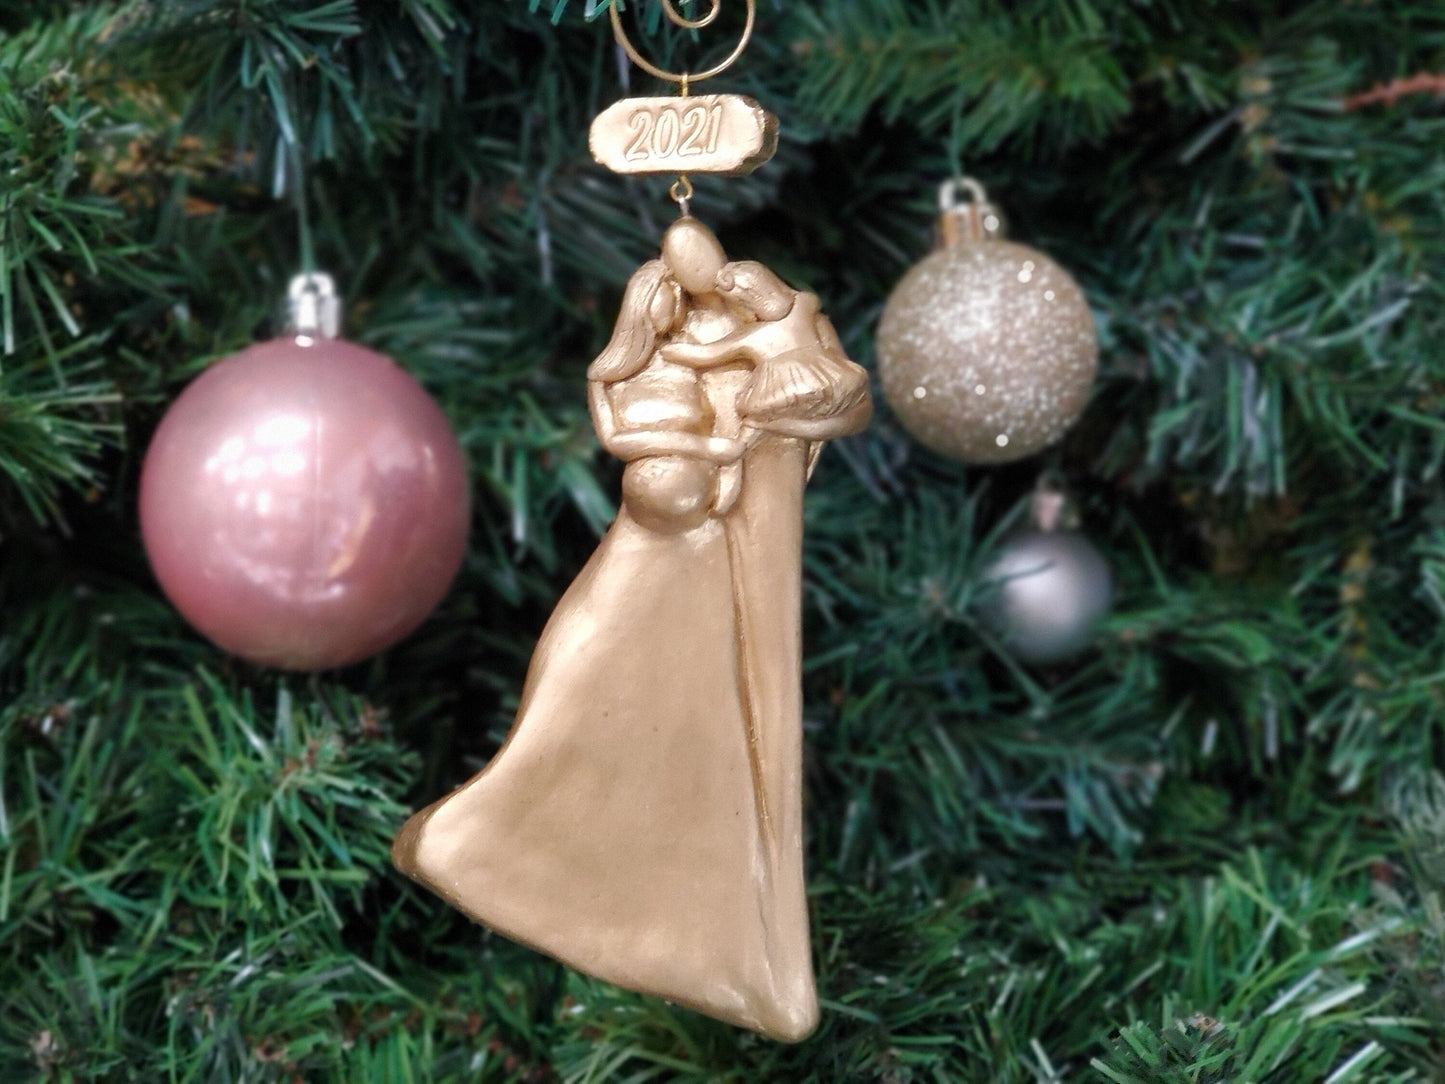 Pregnant Expecting Family of Three with a Toddler GirlChristmas Ornament OrDrEFO3-YTC-G